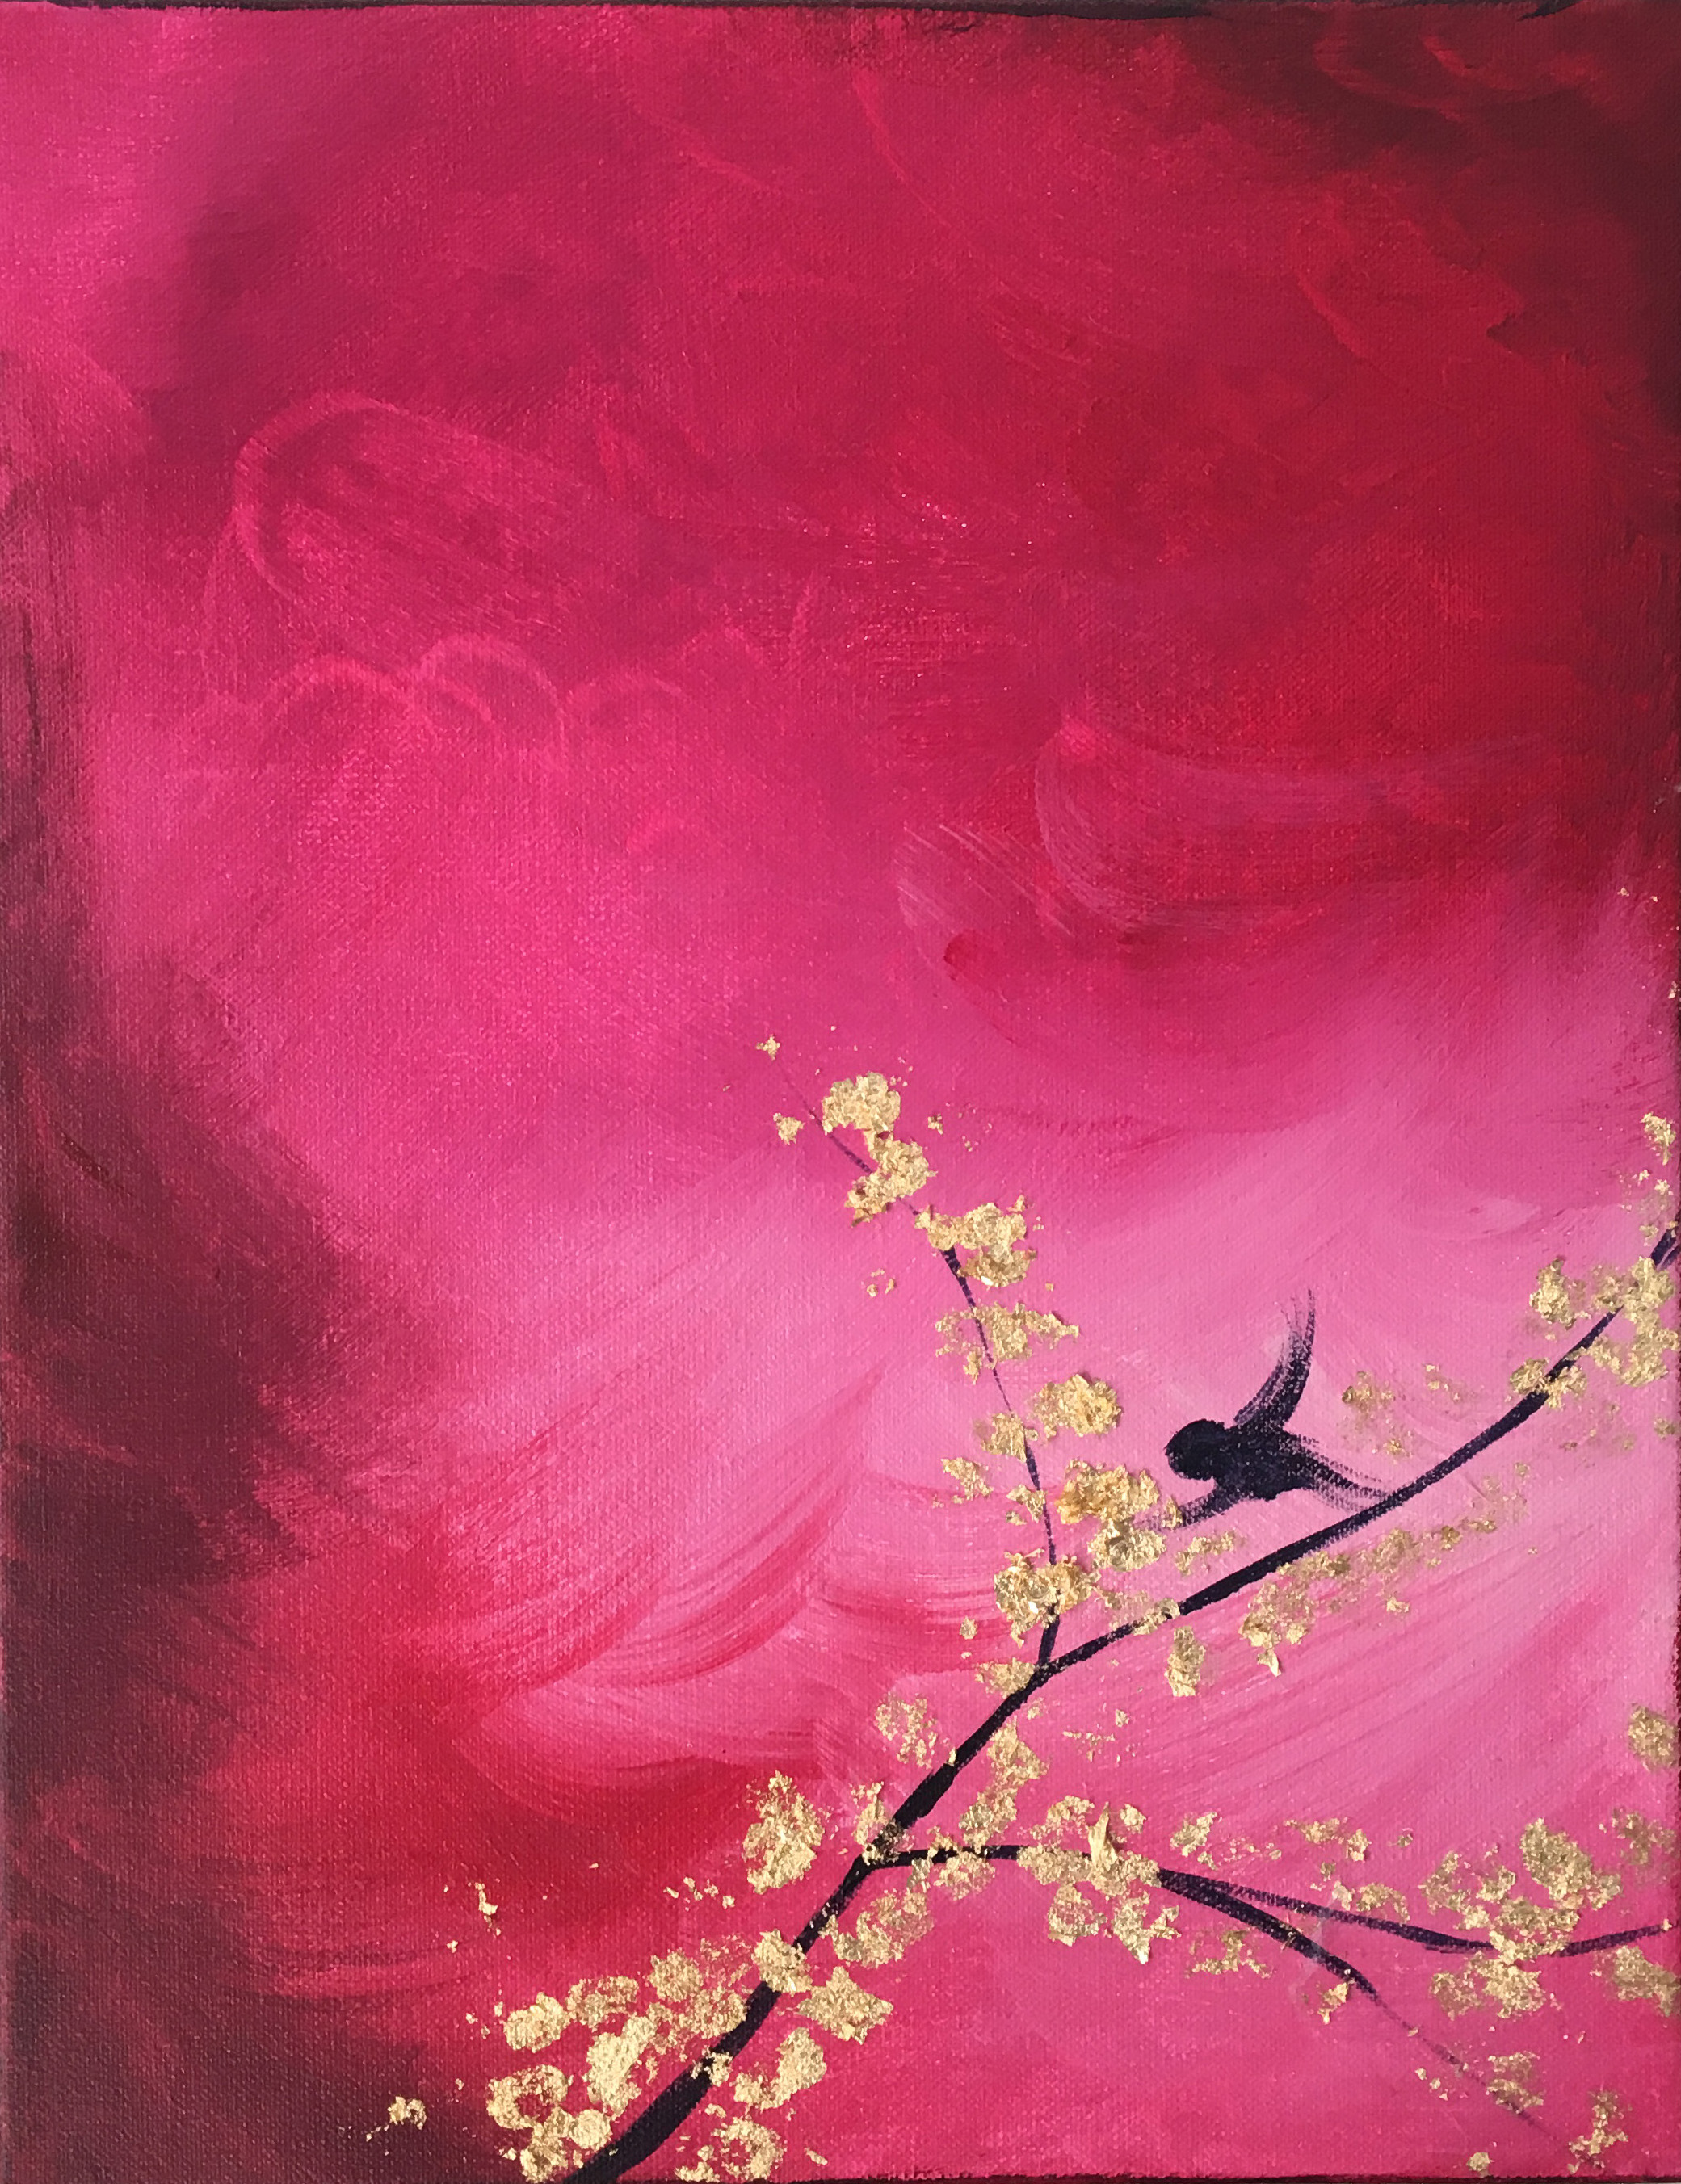 3_7 x 9 Acrylic Painting with Gold Leaf Foil.jpg